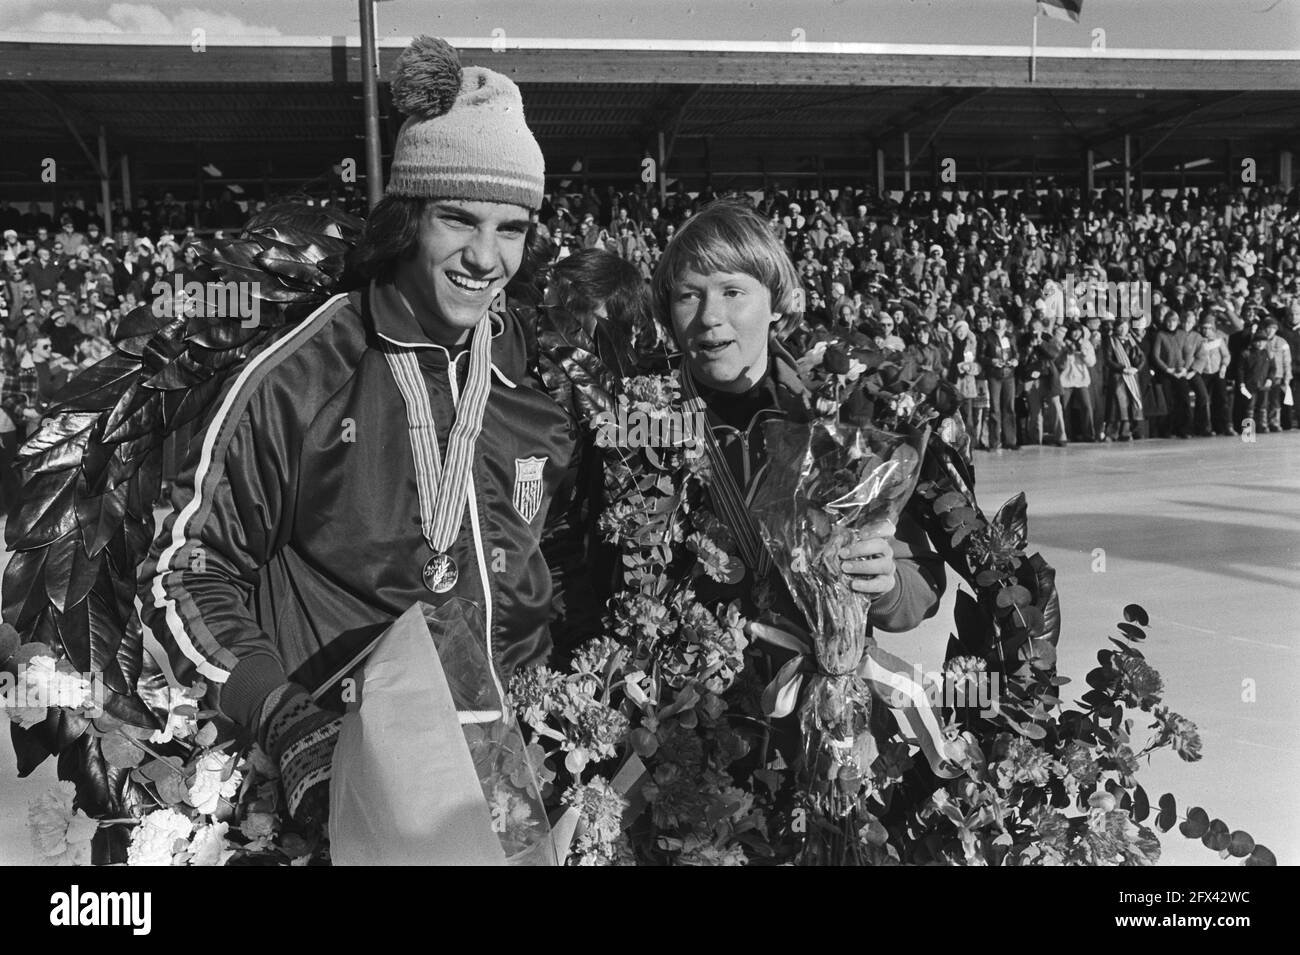 The champions Eric Heiden and Sylvia Burka with laurel wreath, February 27, 1977, speed skaters, sports, world championships, The Netherlands, 20th century press agency photo, news to remember, documentary, historic photography 1945-1990, visual stories, human history of the Twentieth Century, capturing moments in time Stock Photo